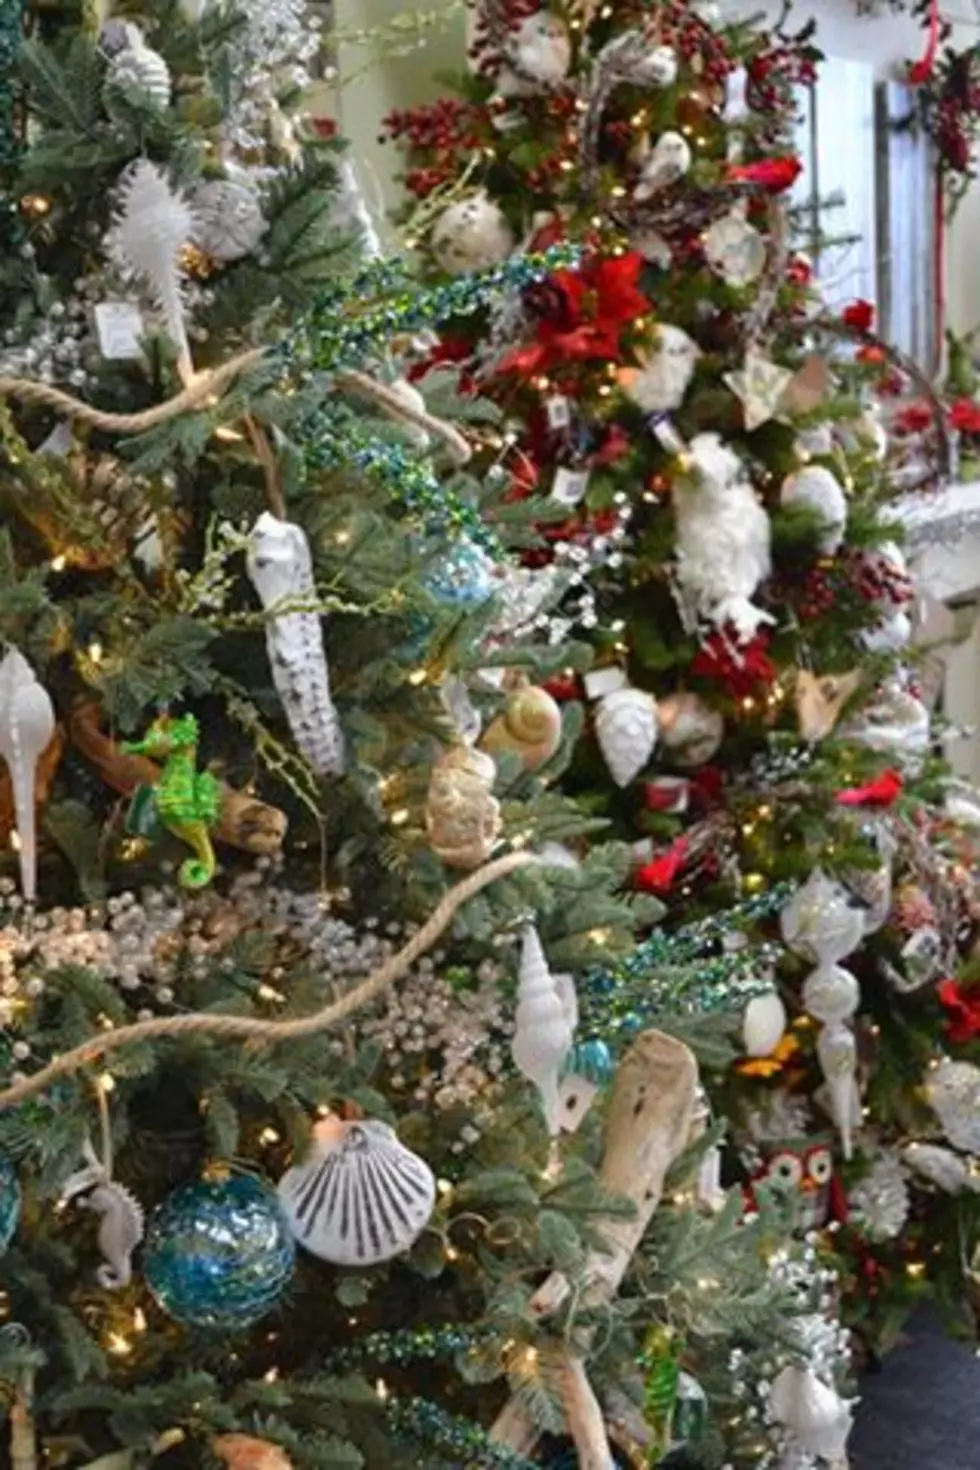 Elaine’s Flower Shoppe In Depew Gearing Up Christmas + Open House